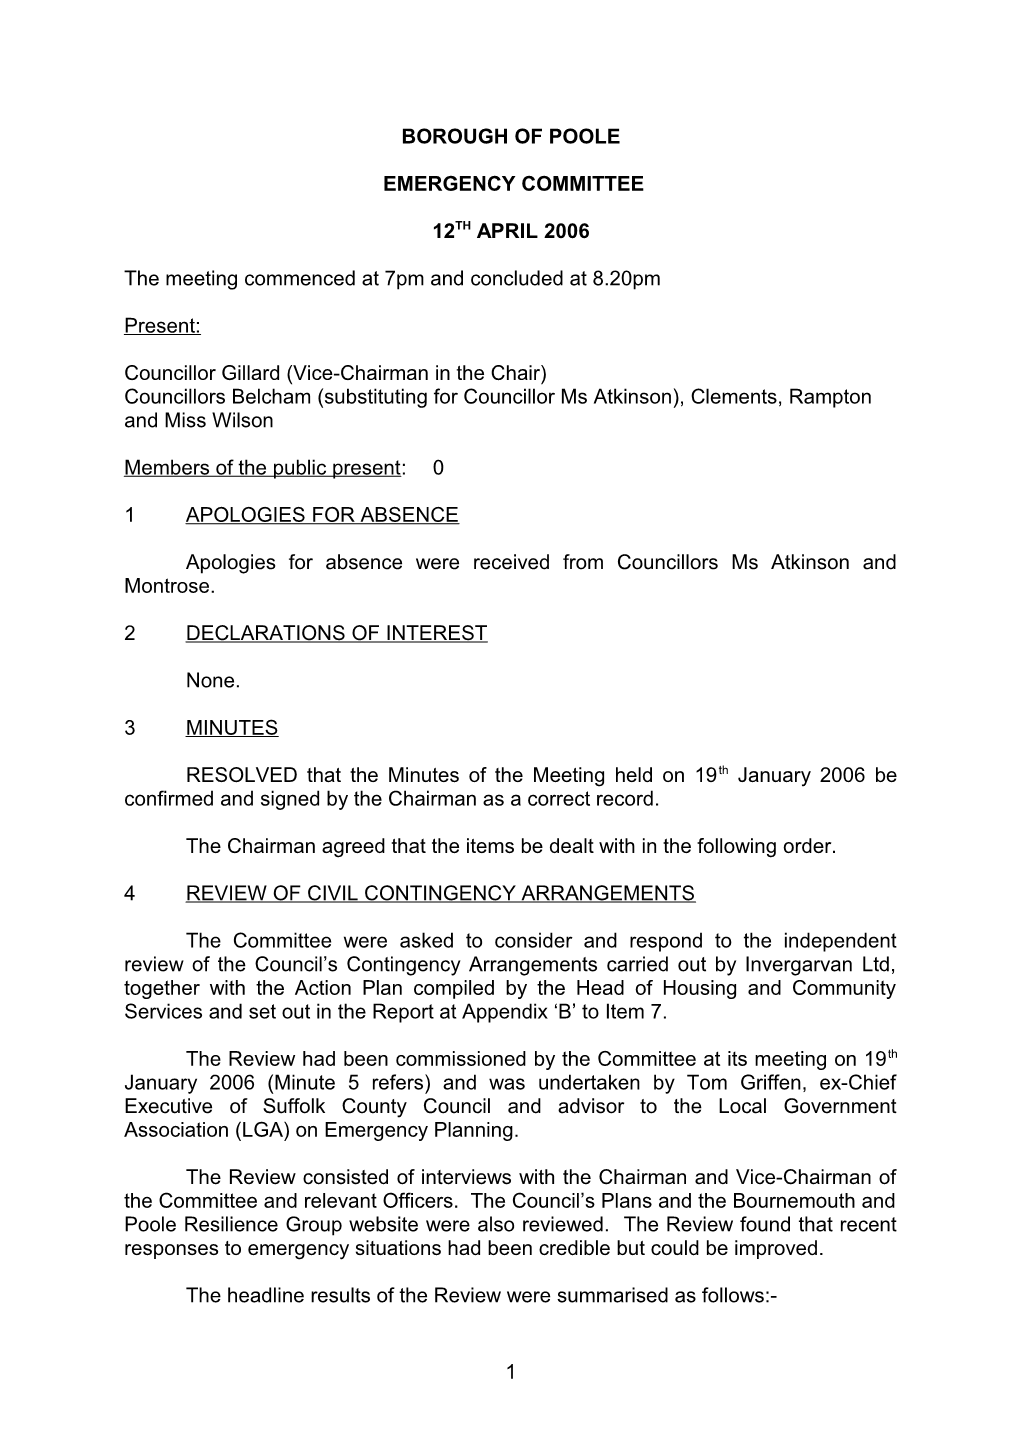 Minutes - Emergency Committee - 12 April 2006